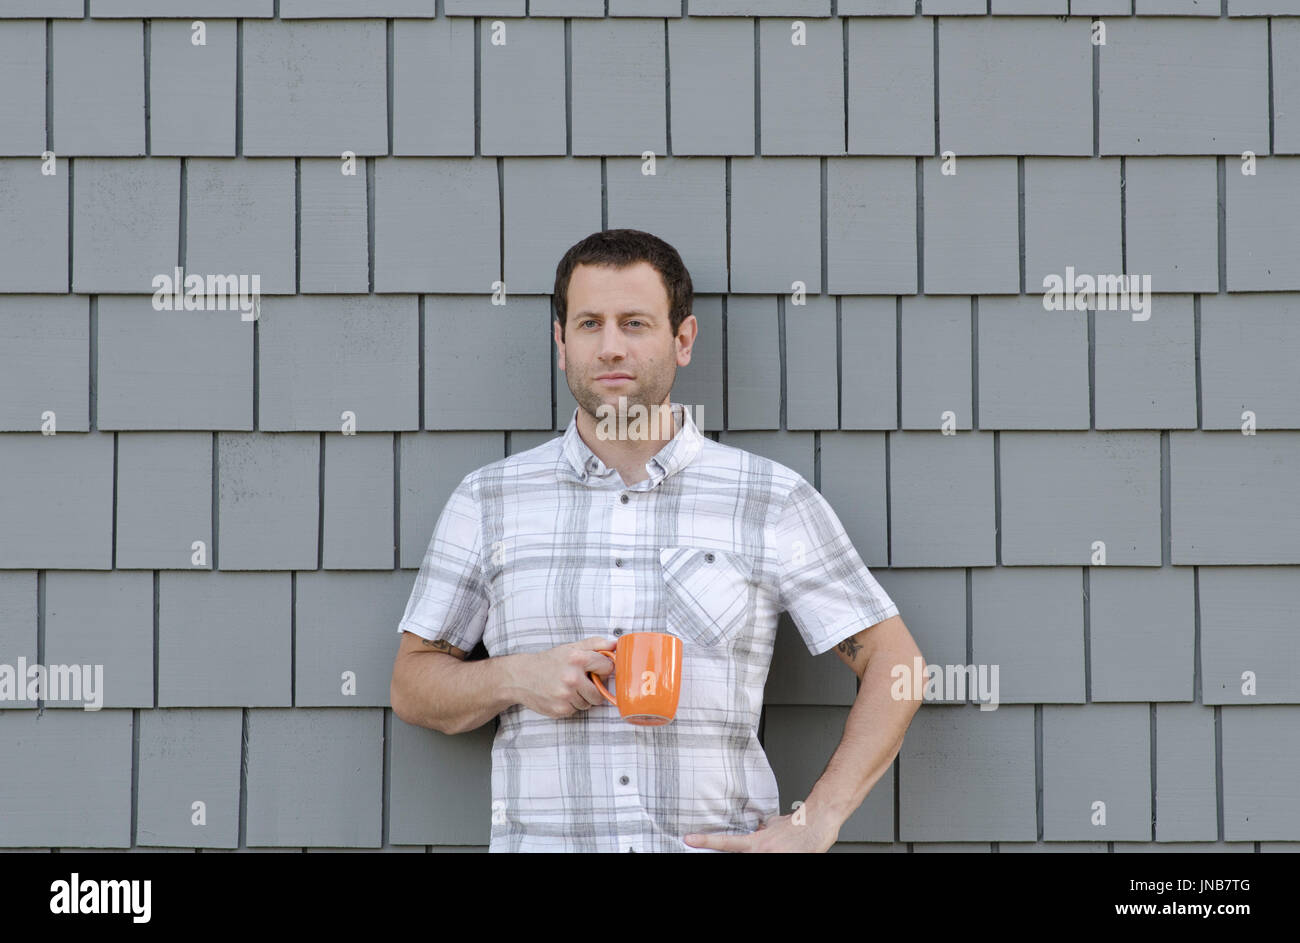 Man with hand on his hip holding a coffee mug against a gray wall. Stock Photo